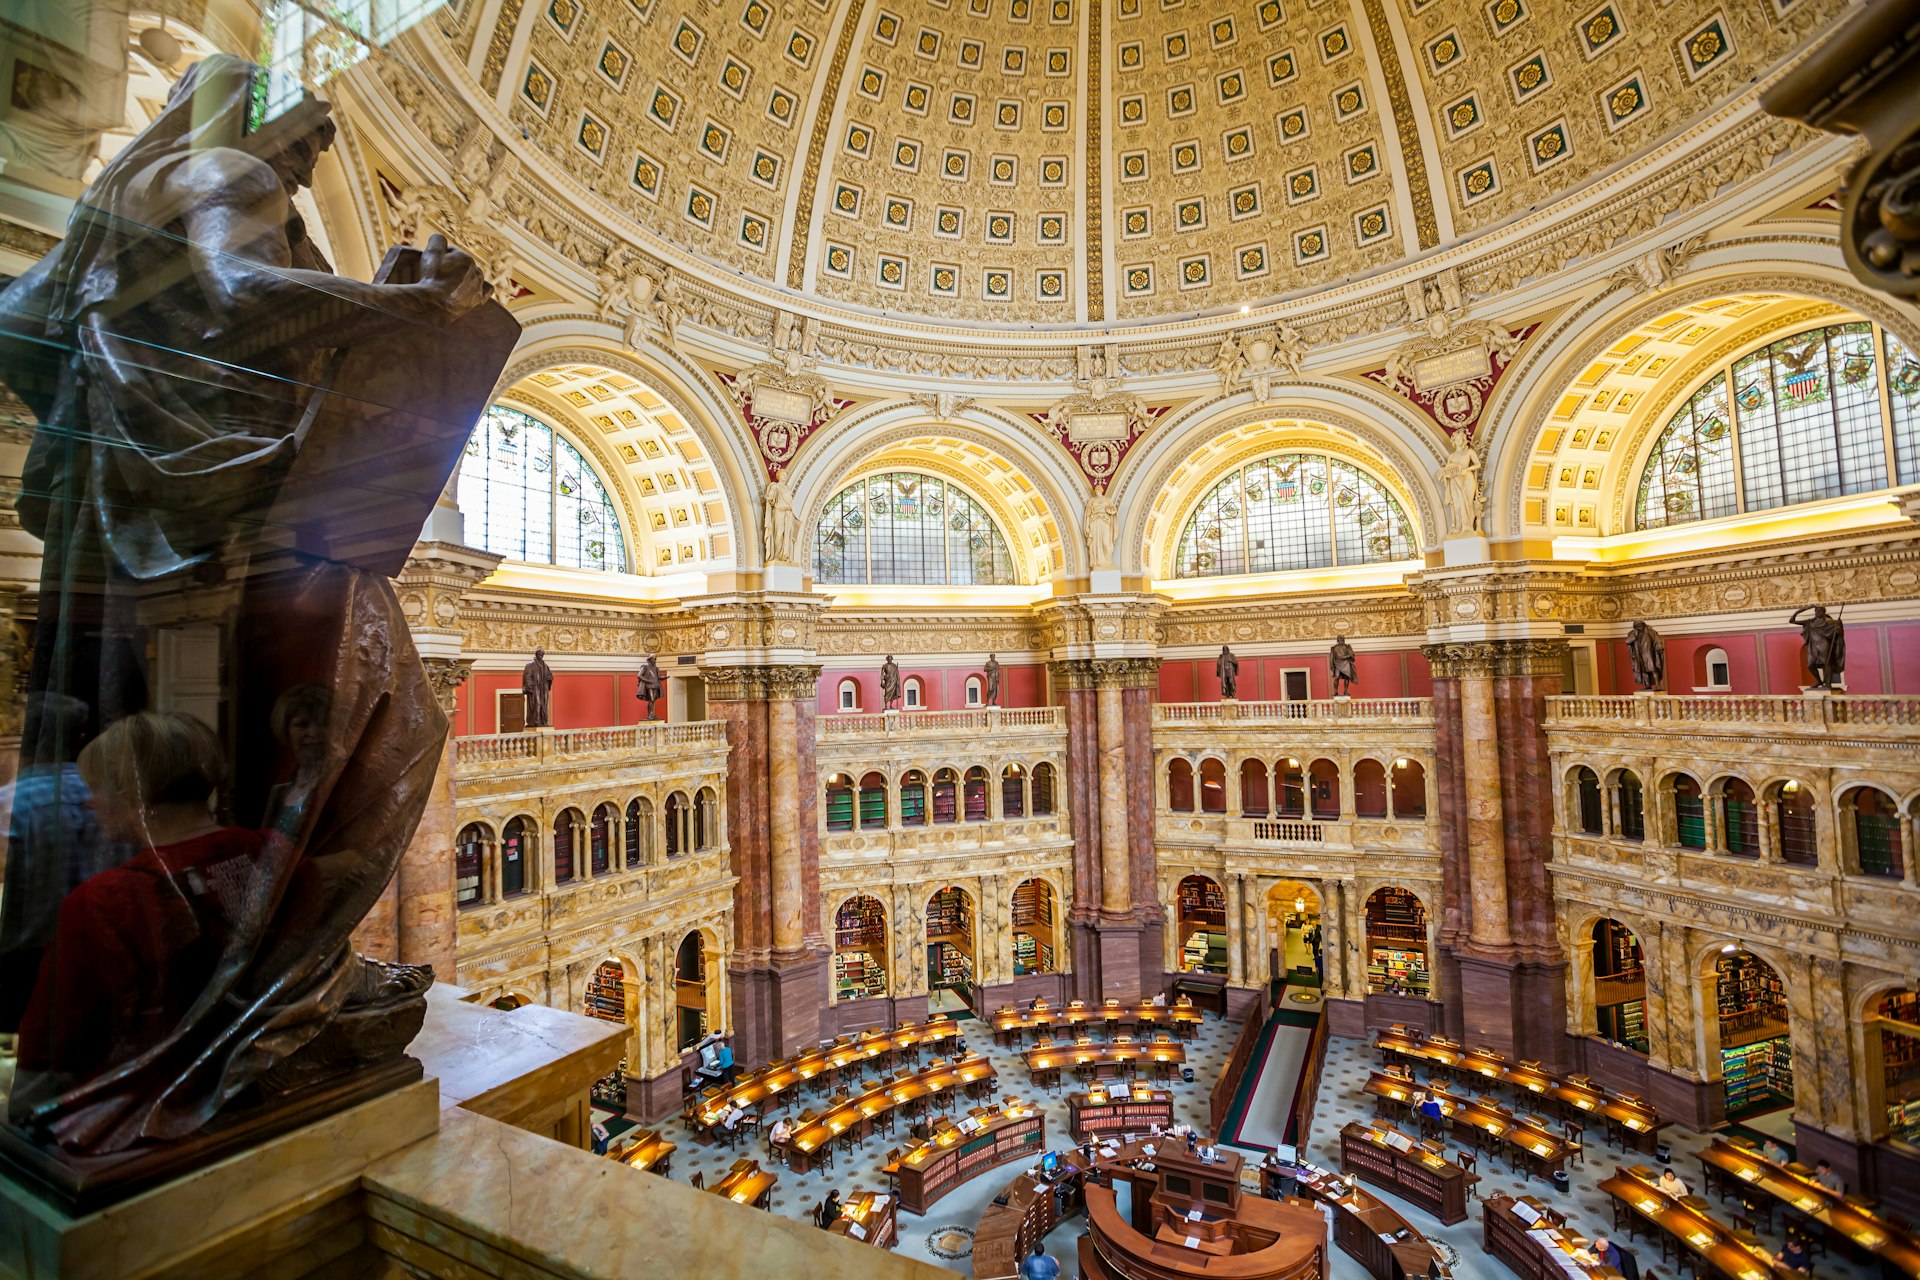 A vast reading room in the Library of Congress, with tables laid out in a circular format